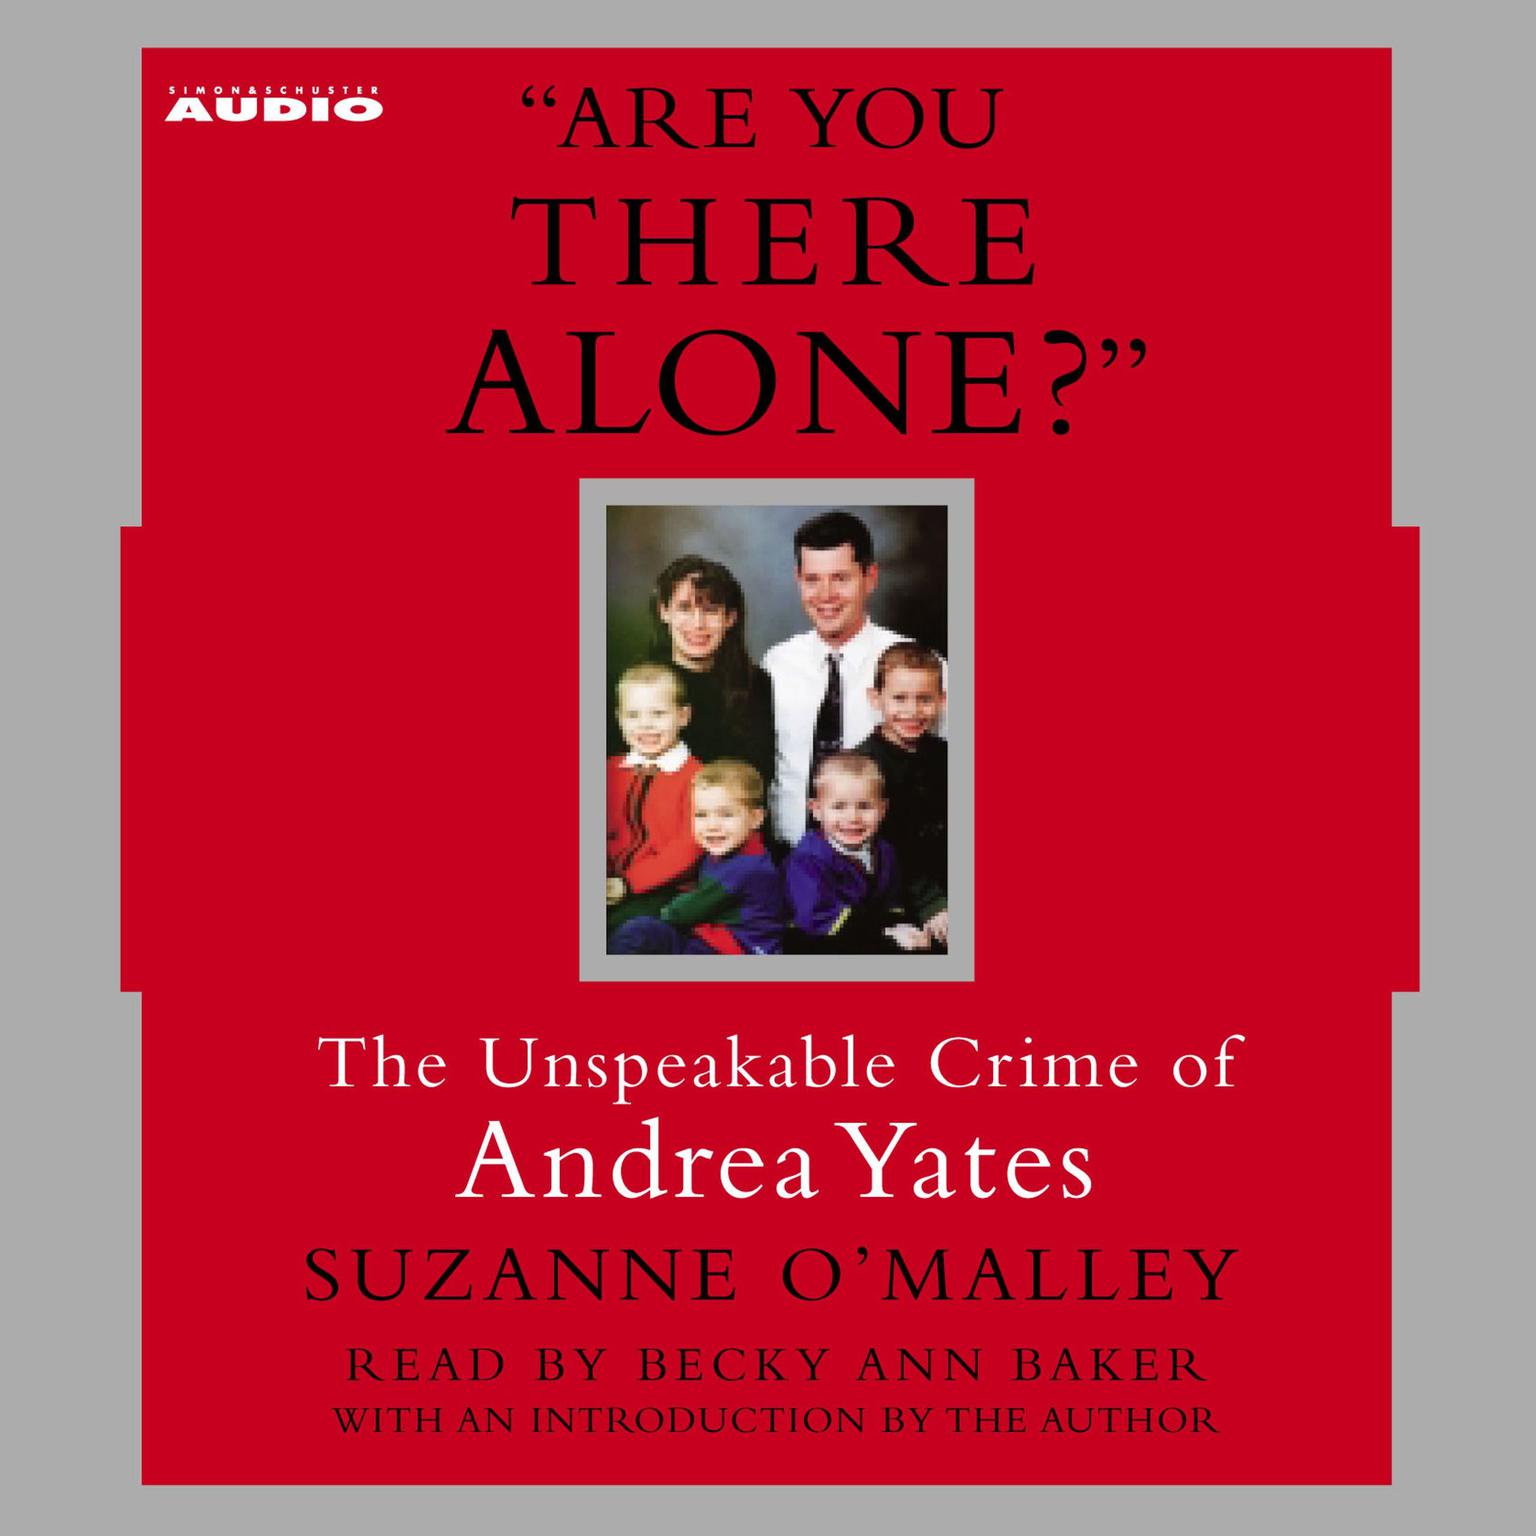 Are You There Alone? (Abridged): The Unspeakable Crime of Andrea Yates Audiobook, by Suzanne O’Malley